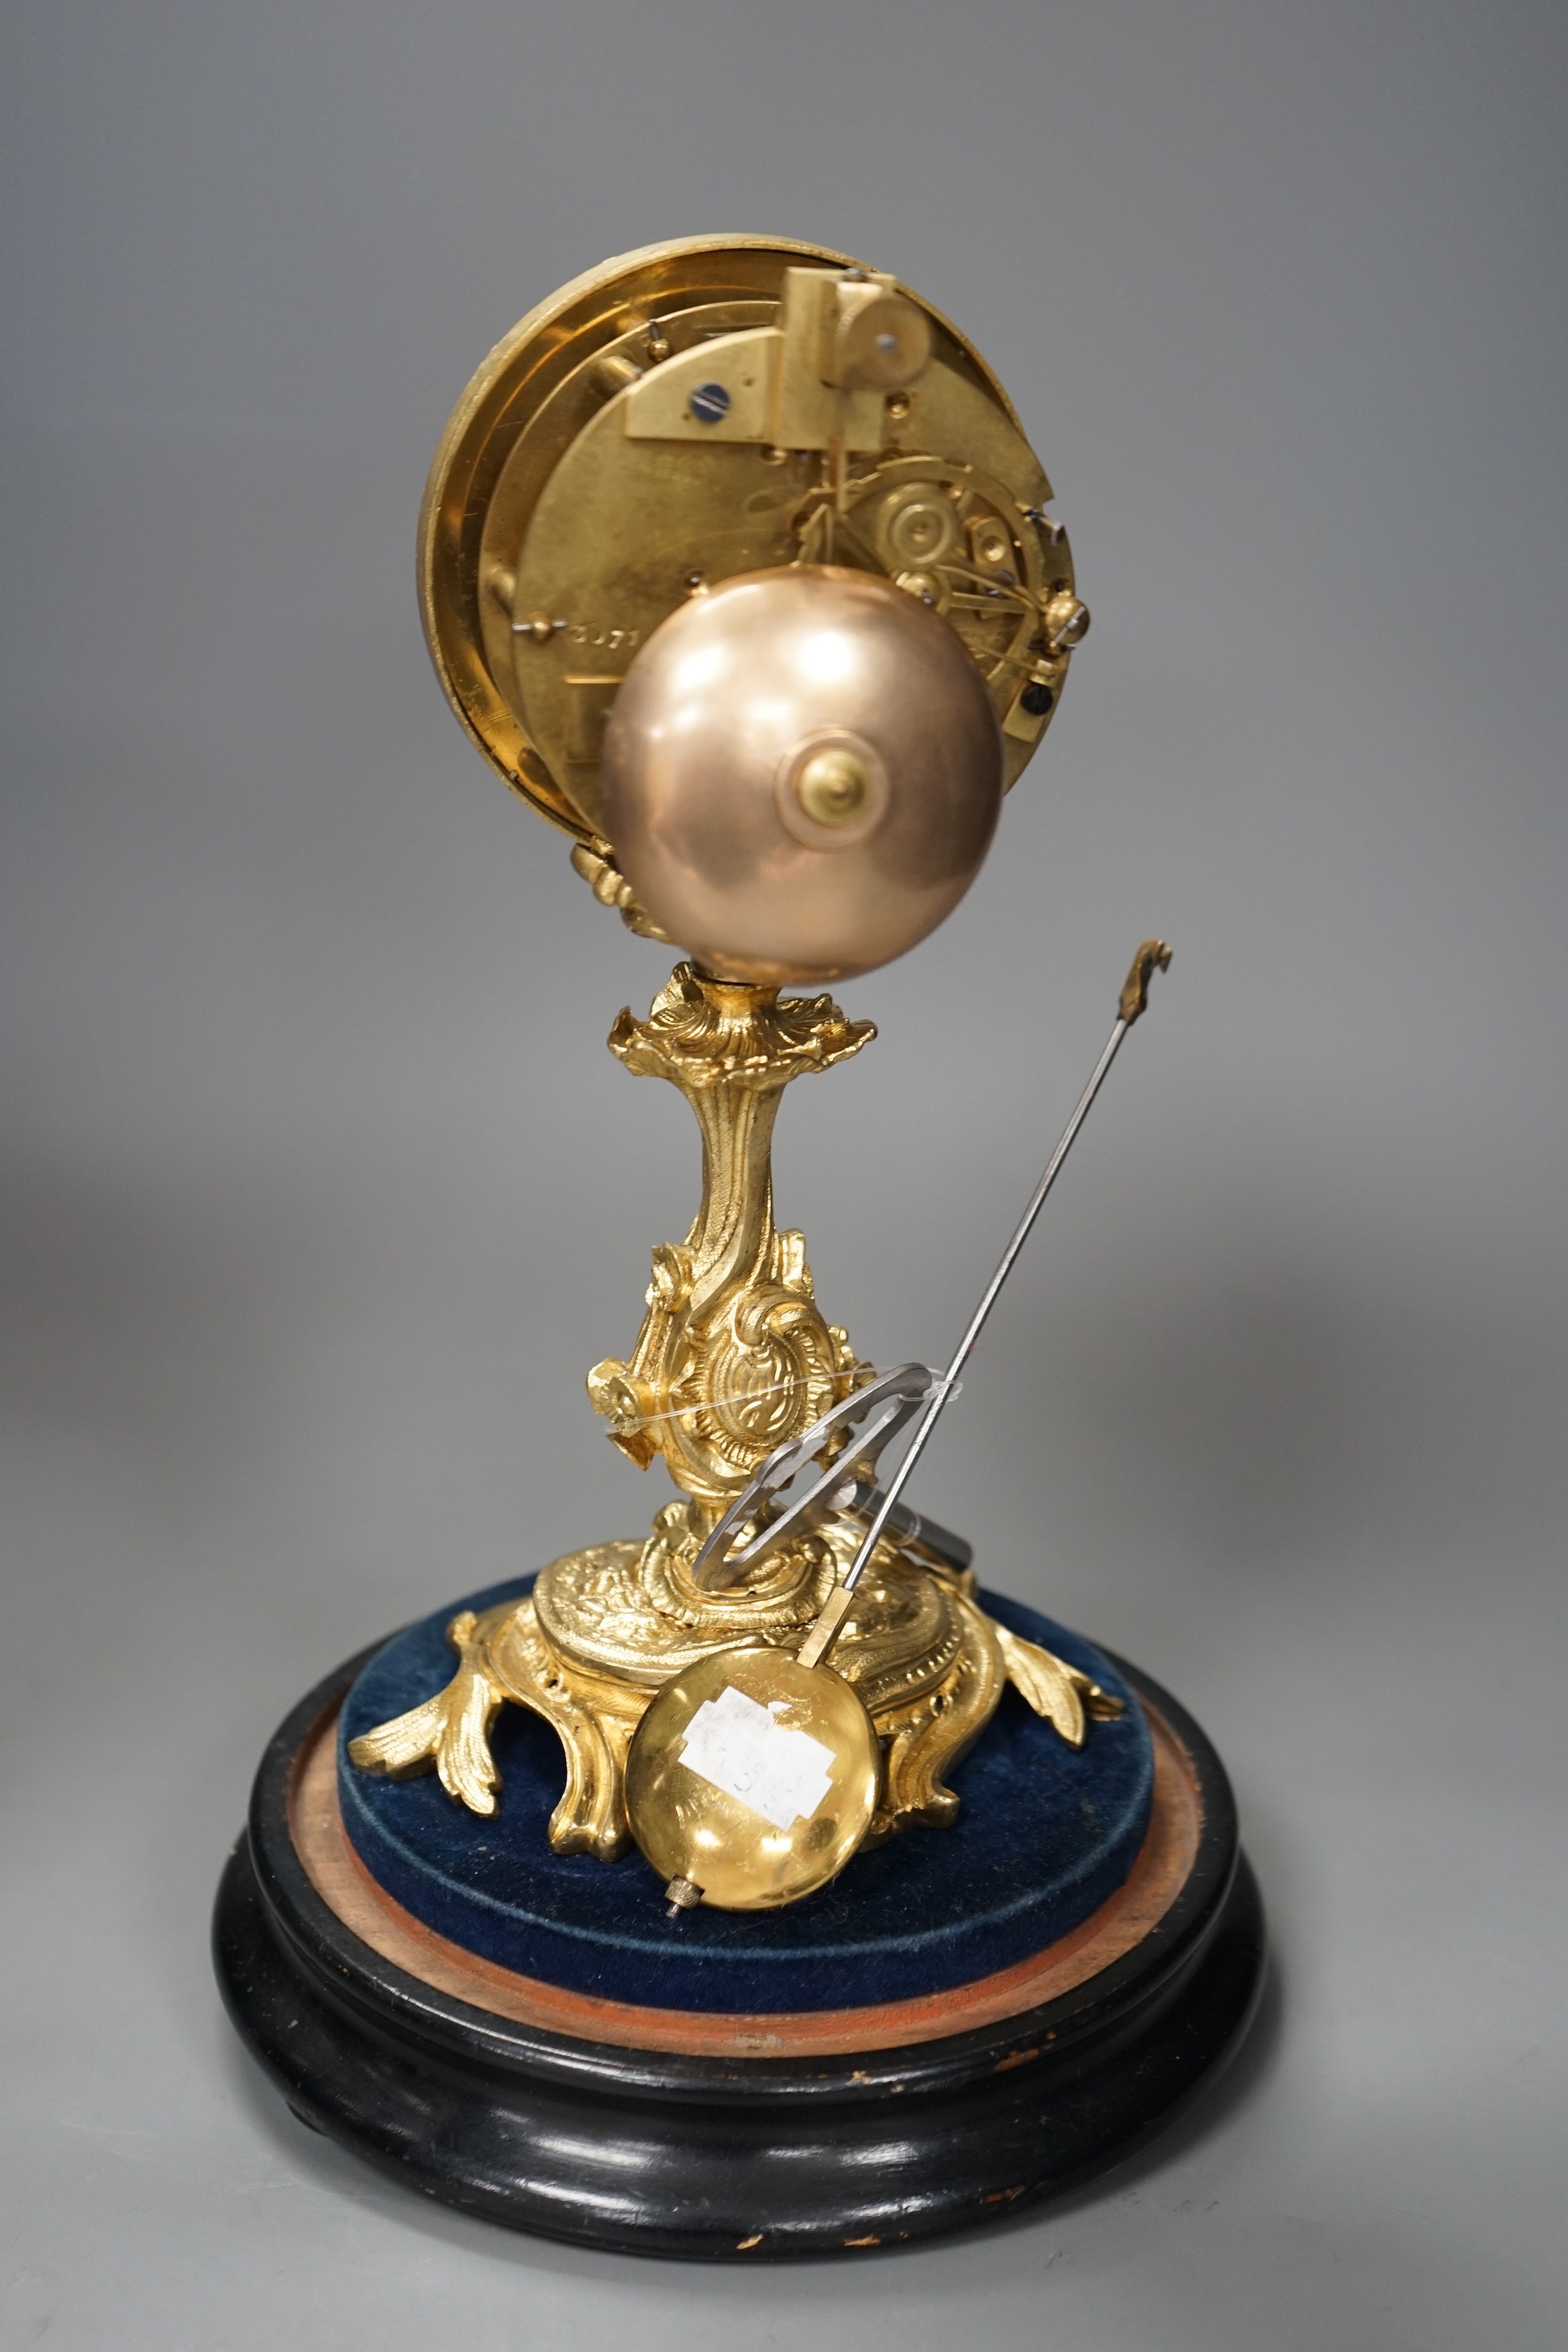 A French Grignon-Meusnier of Paris ormolu clock under dome, with key and pendulum